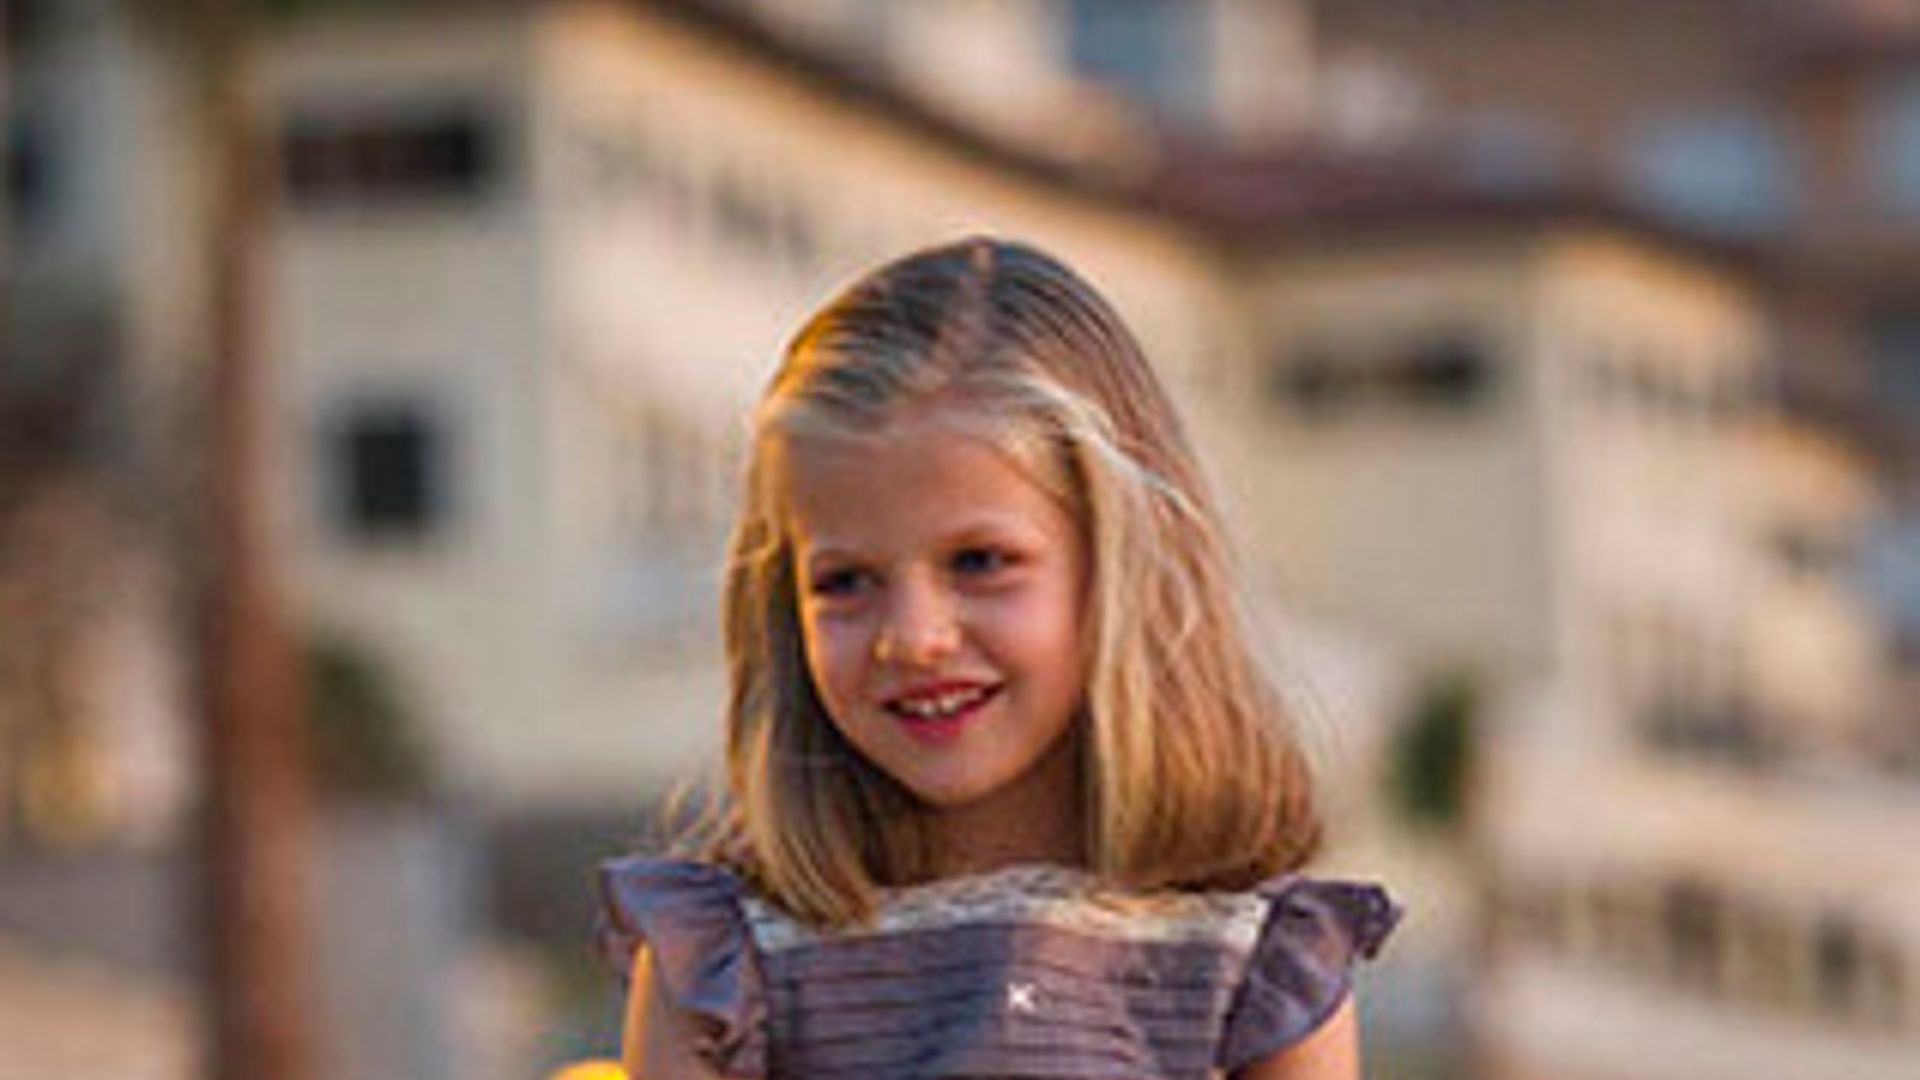 9 facts about Princess Leonor of Spain